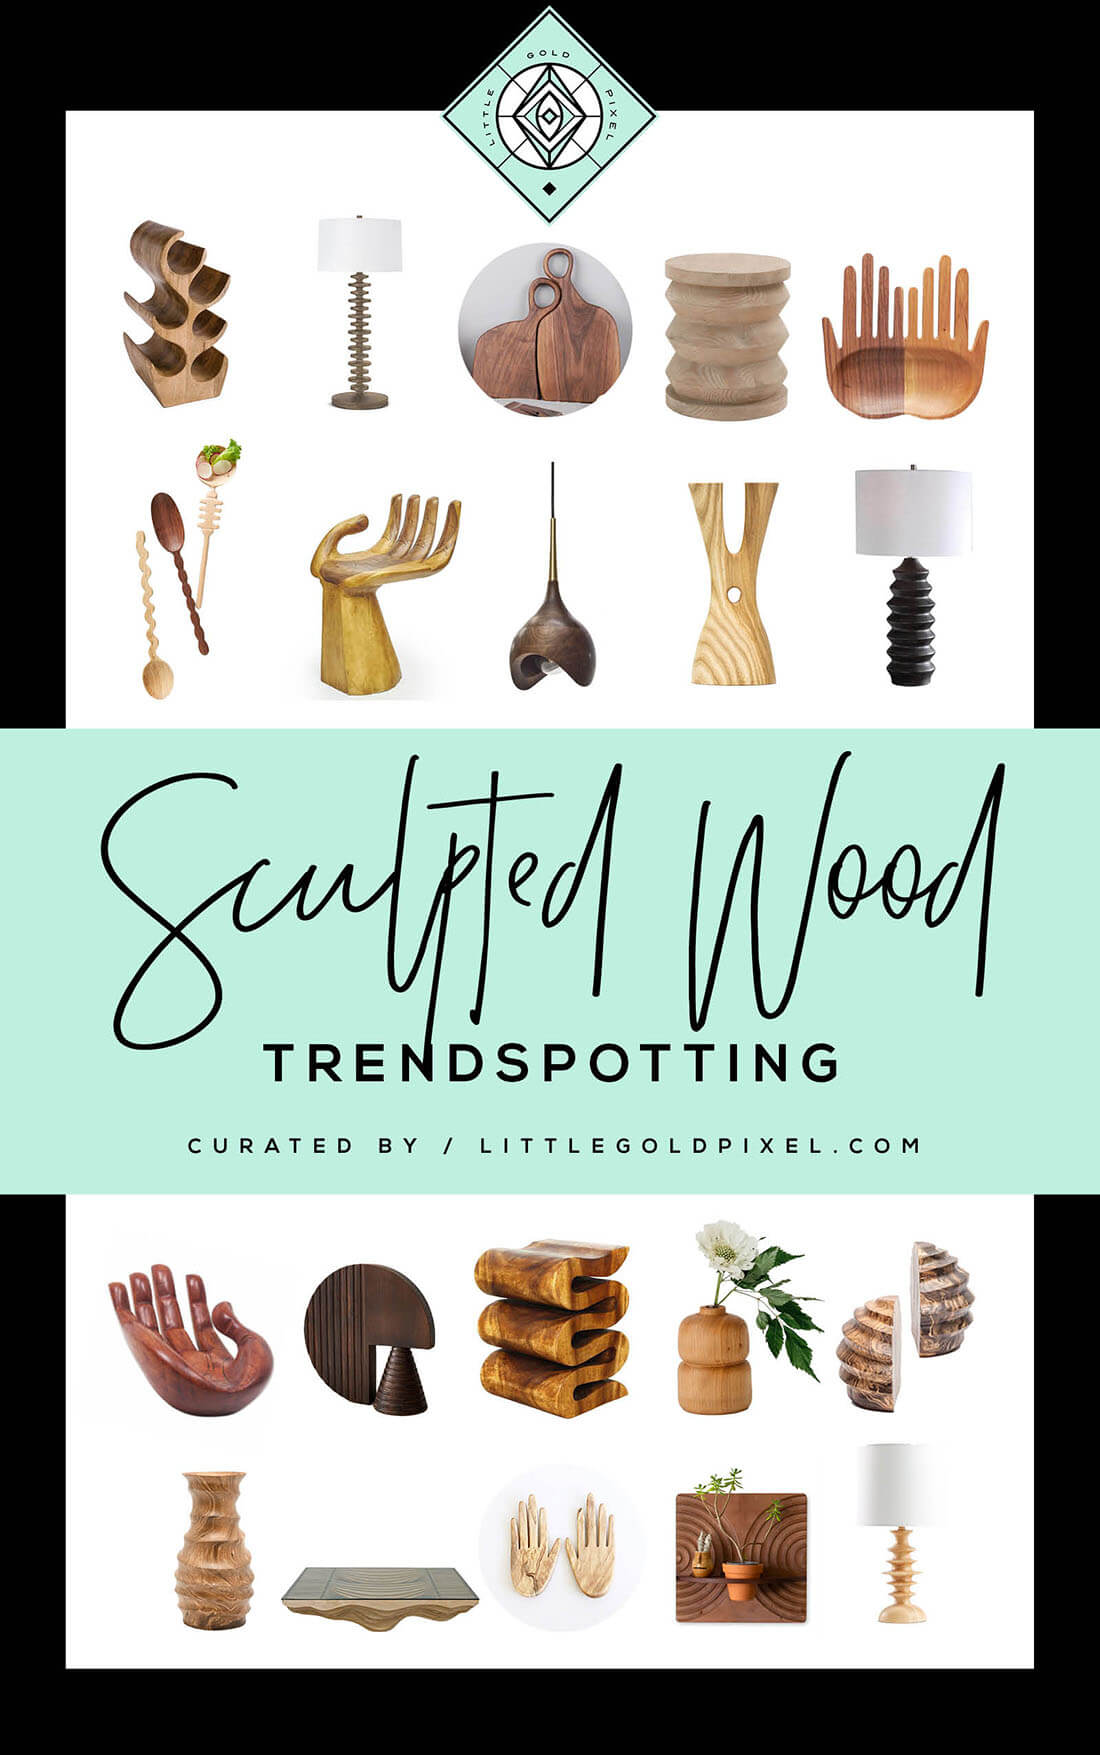 20 Modern Wood Pieces You'll Want to Add to Your Cart • Little Gold Pixel • #boho #mcm #midcentury #modern #wood #sculpted #decorideas #artisandecor